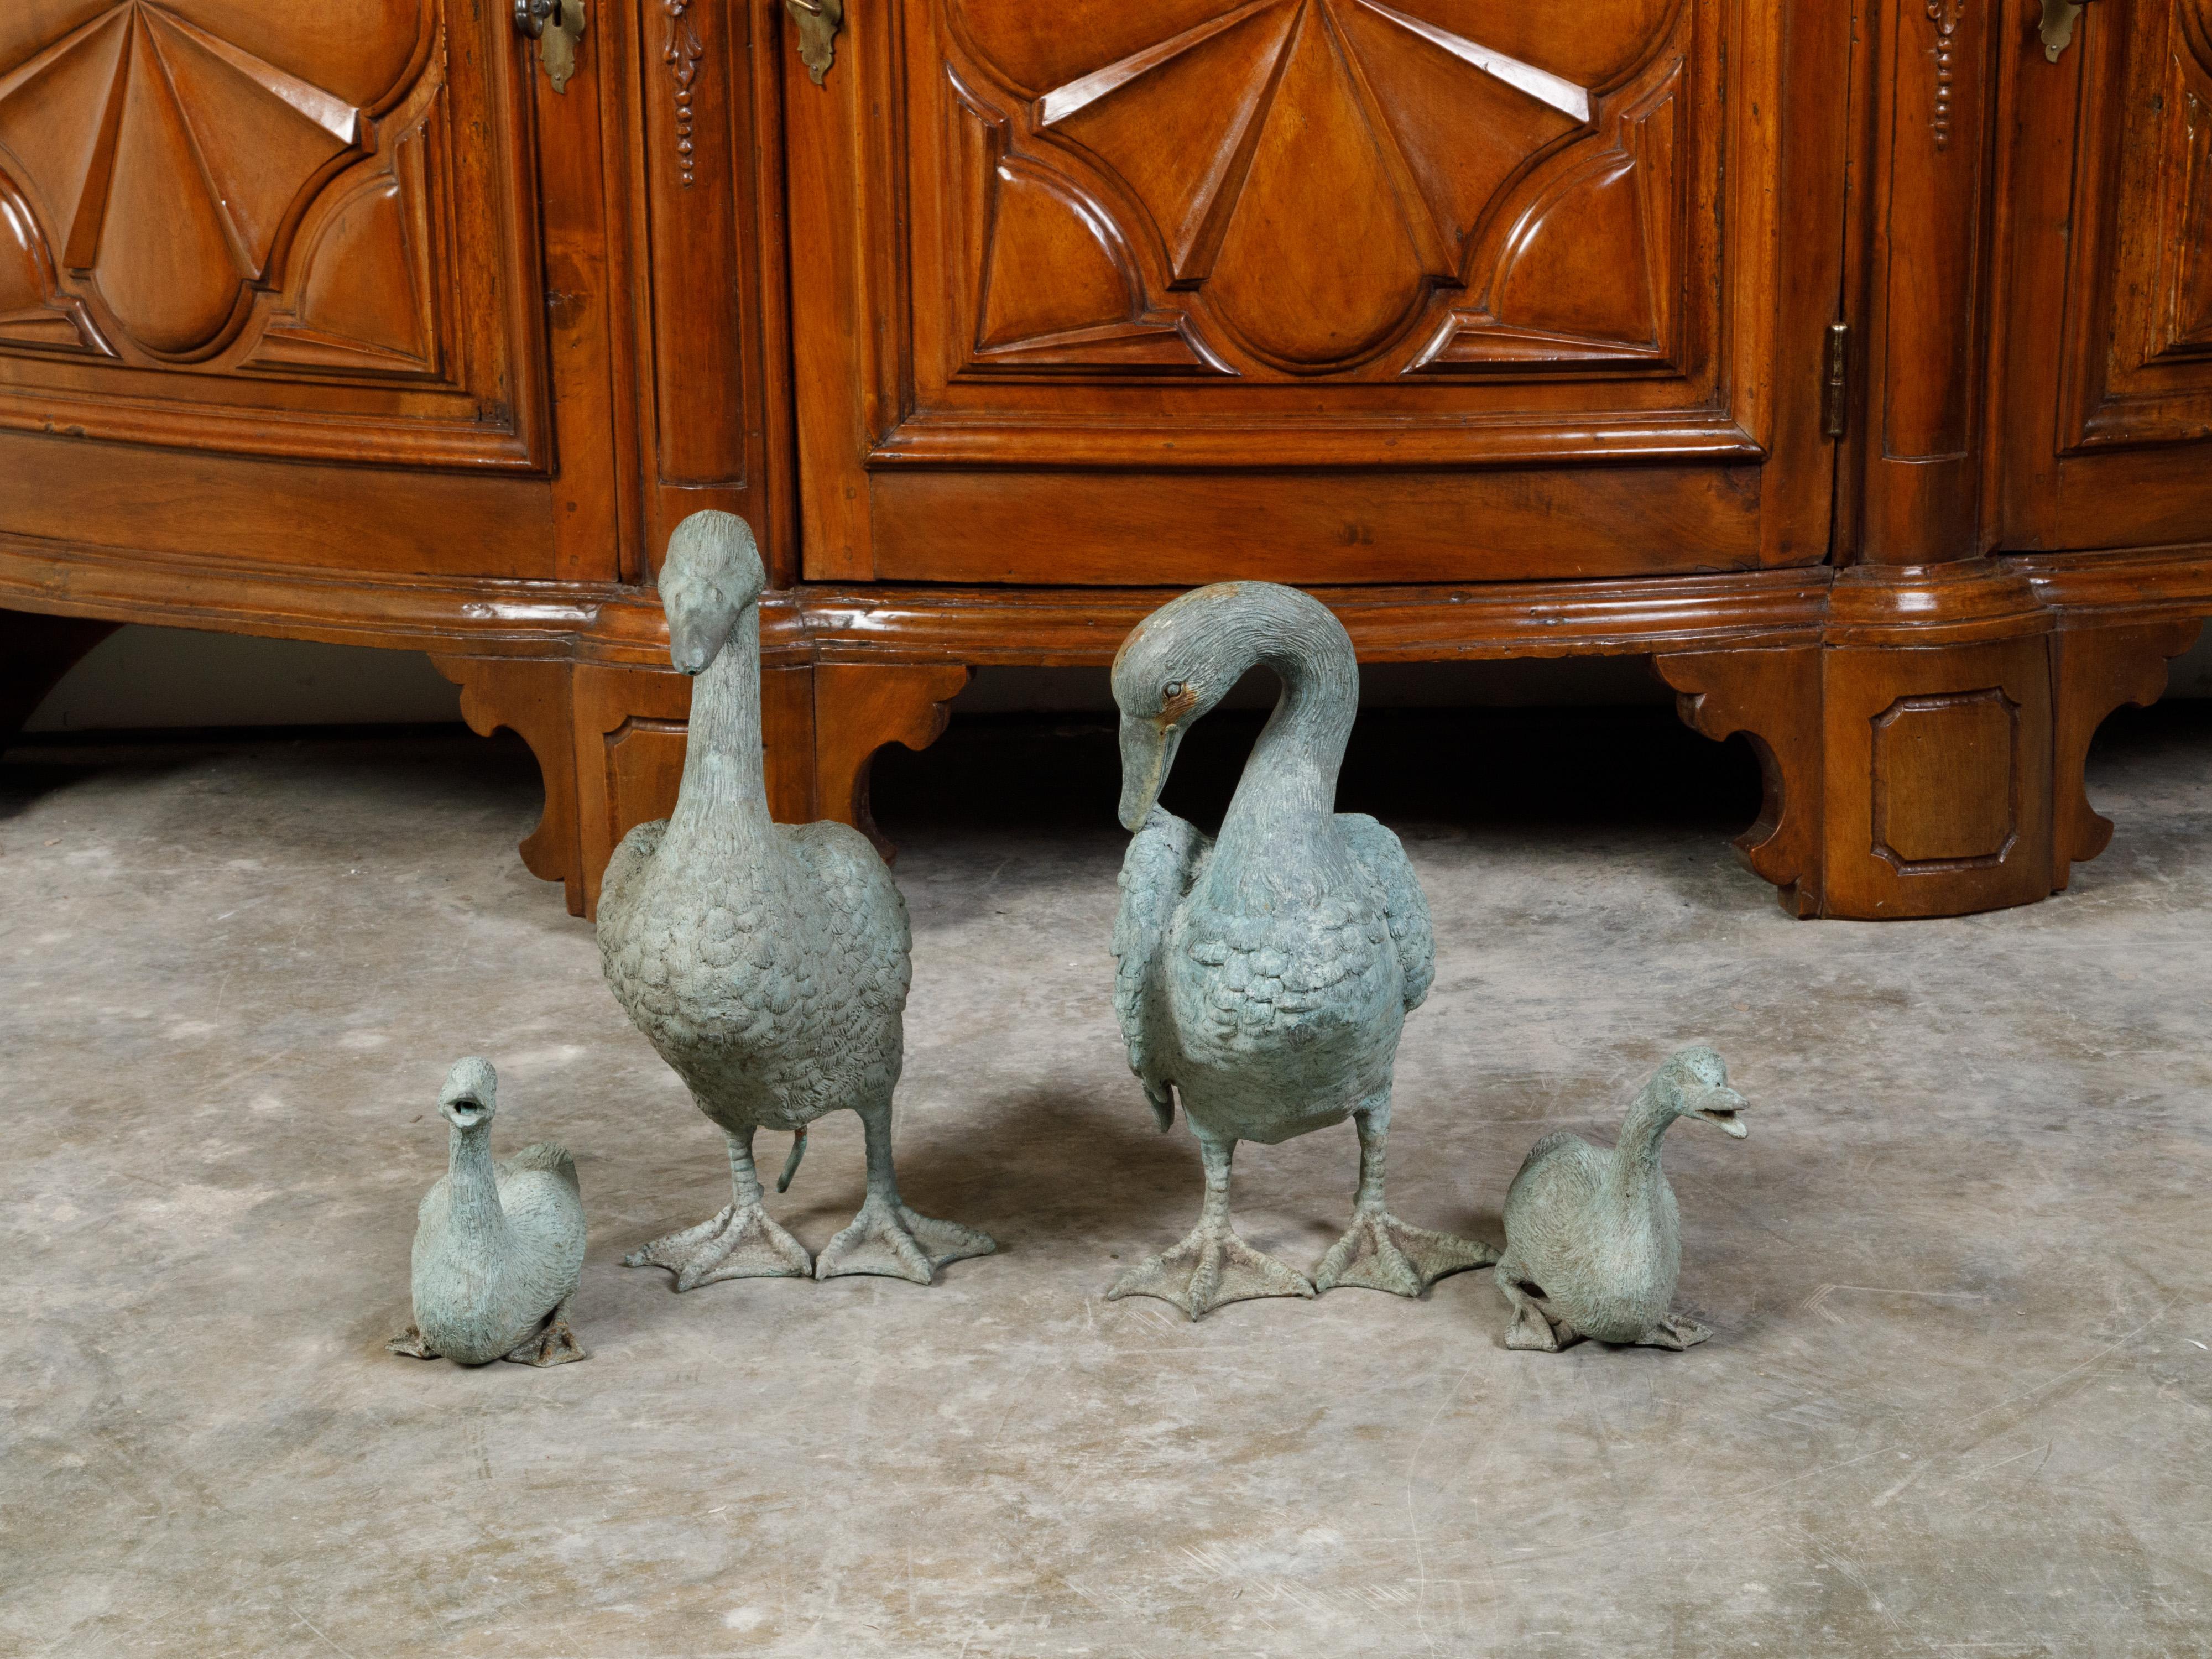 A set of four French bronze duck sculptures from the mid 20th century, depicting two adults and two babies. Created in France during the midcentury period, this sculpted group charms us with its lovely depiction of a family of ducks made of the two